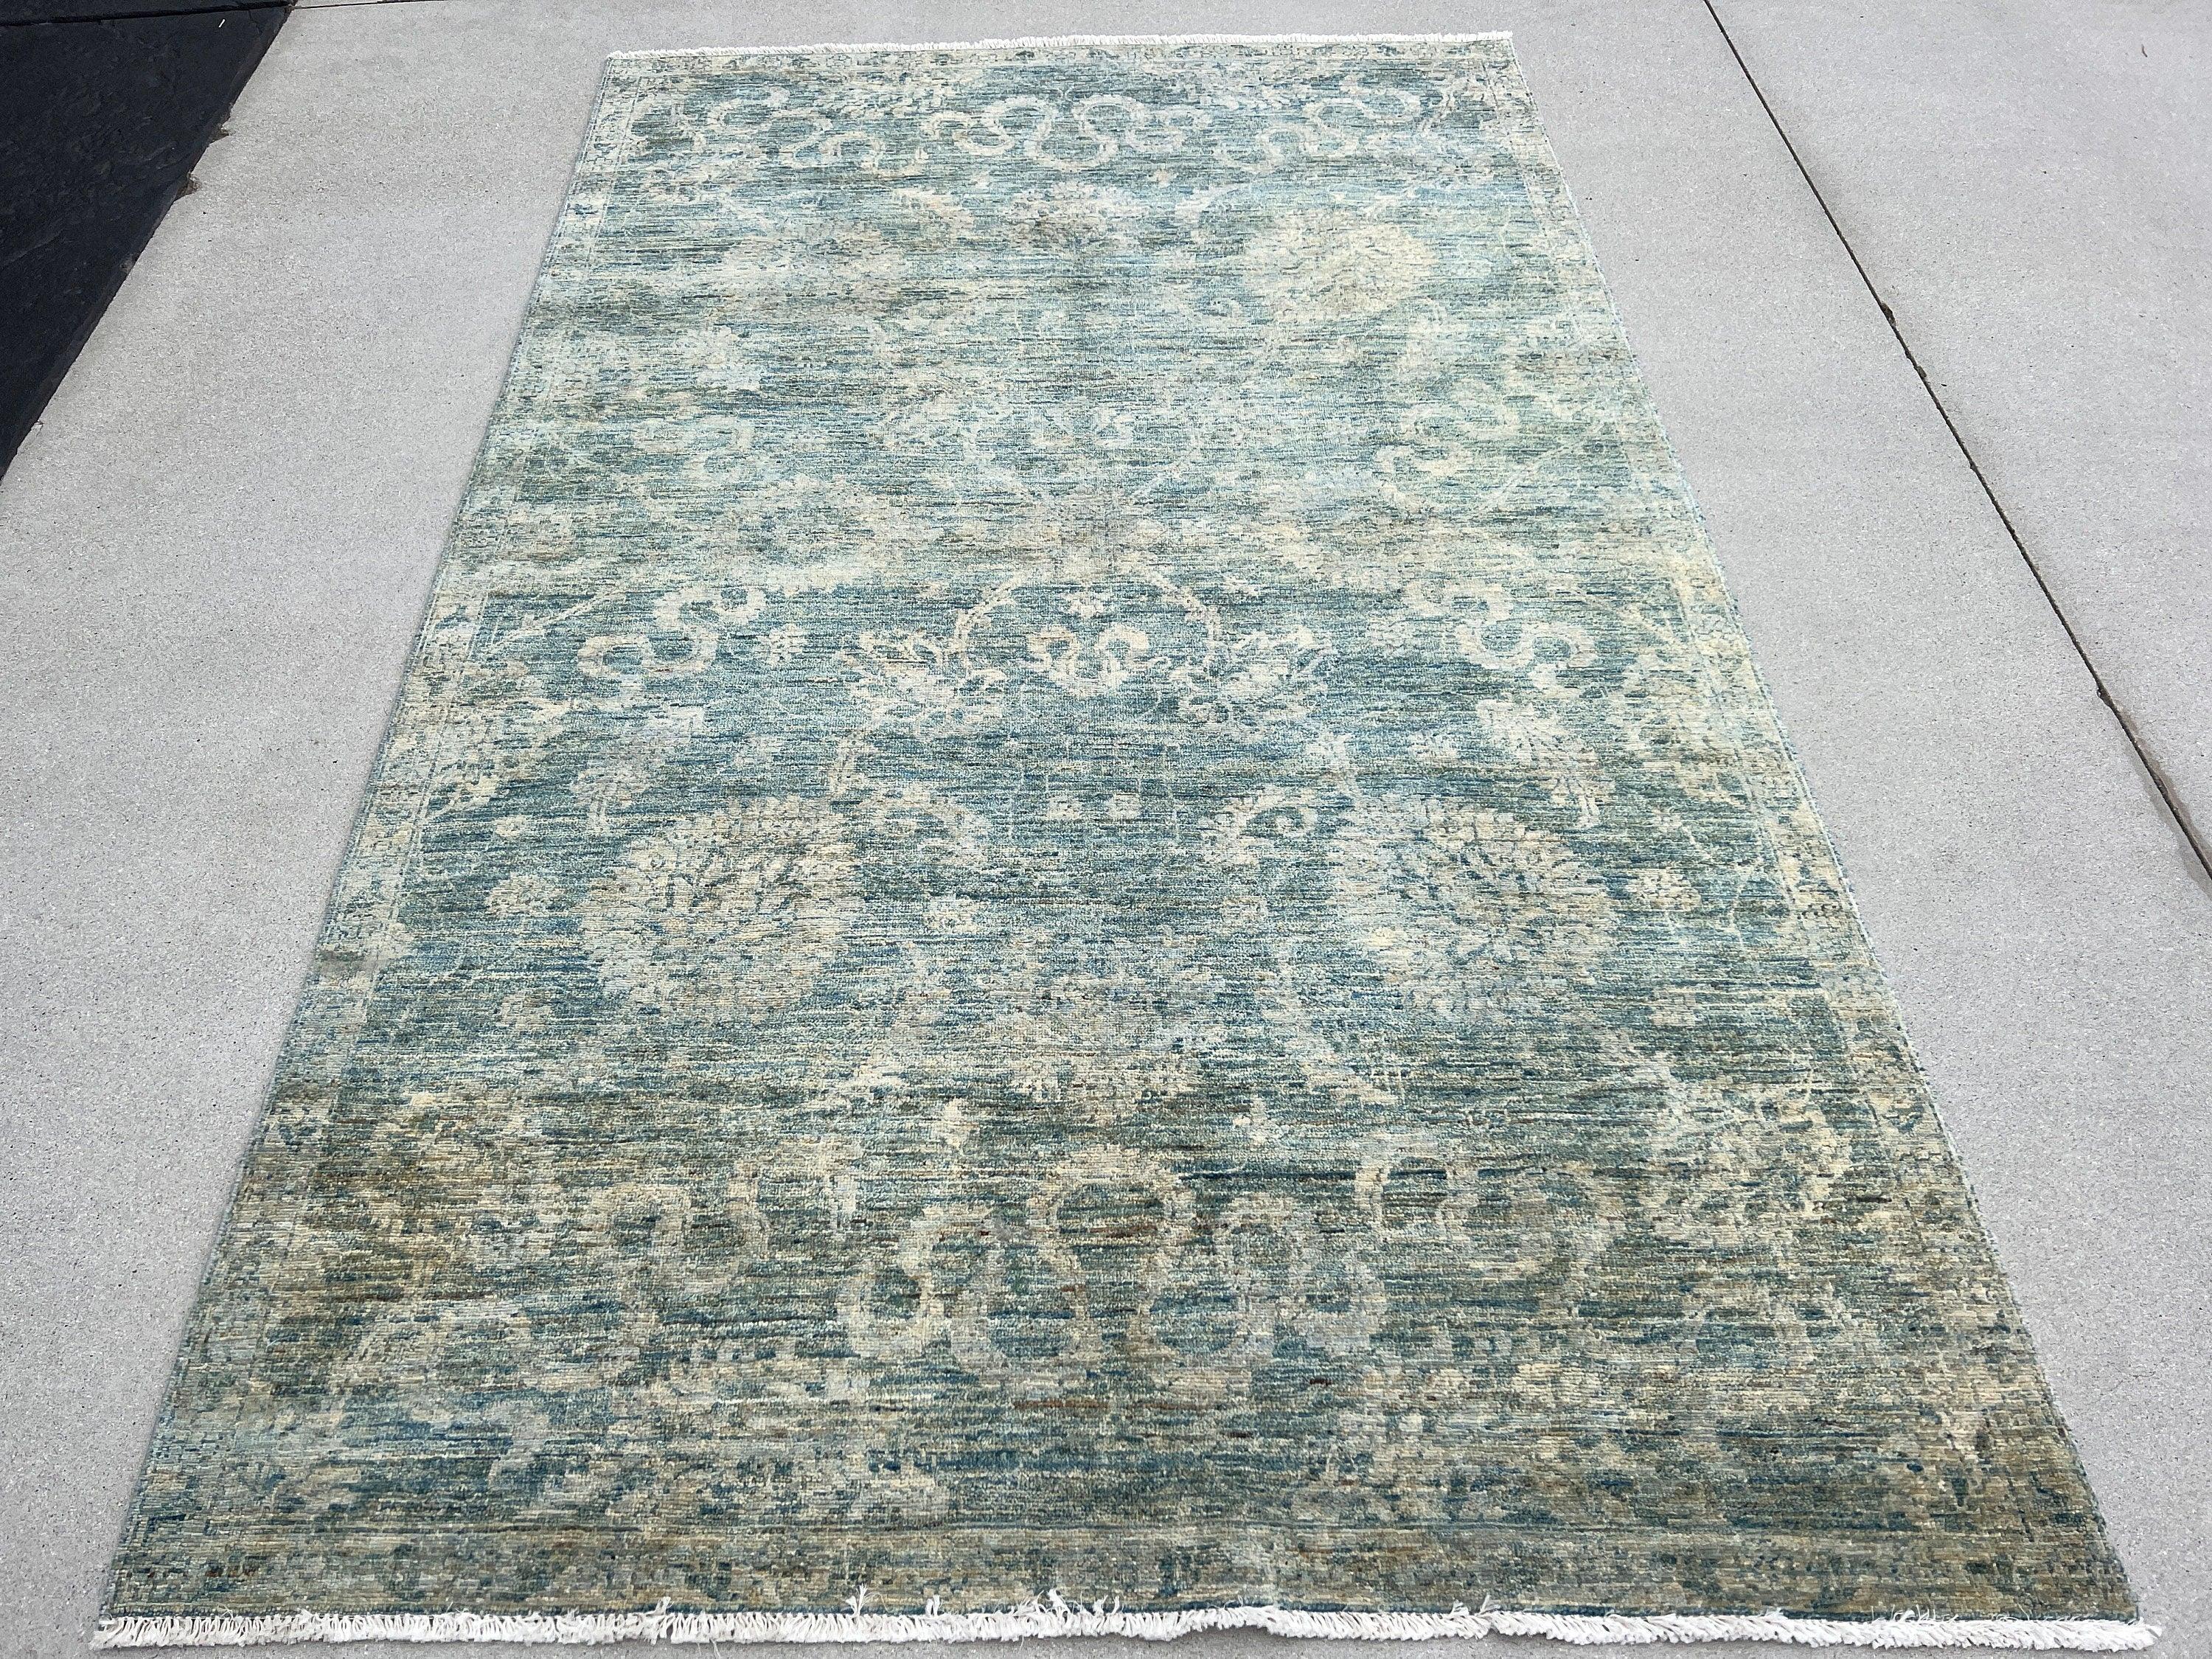 5x8 Hand Knotted Handmade Afghan Rug | Muted Teal Beige Grey Ivory Green Brown | Wool Boho Bohemian Contemporary Woolen Distressed